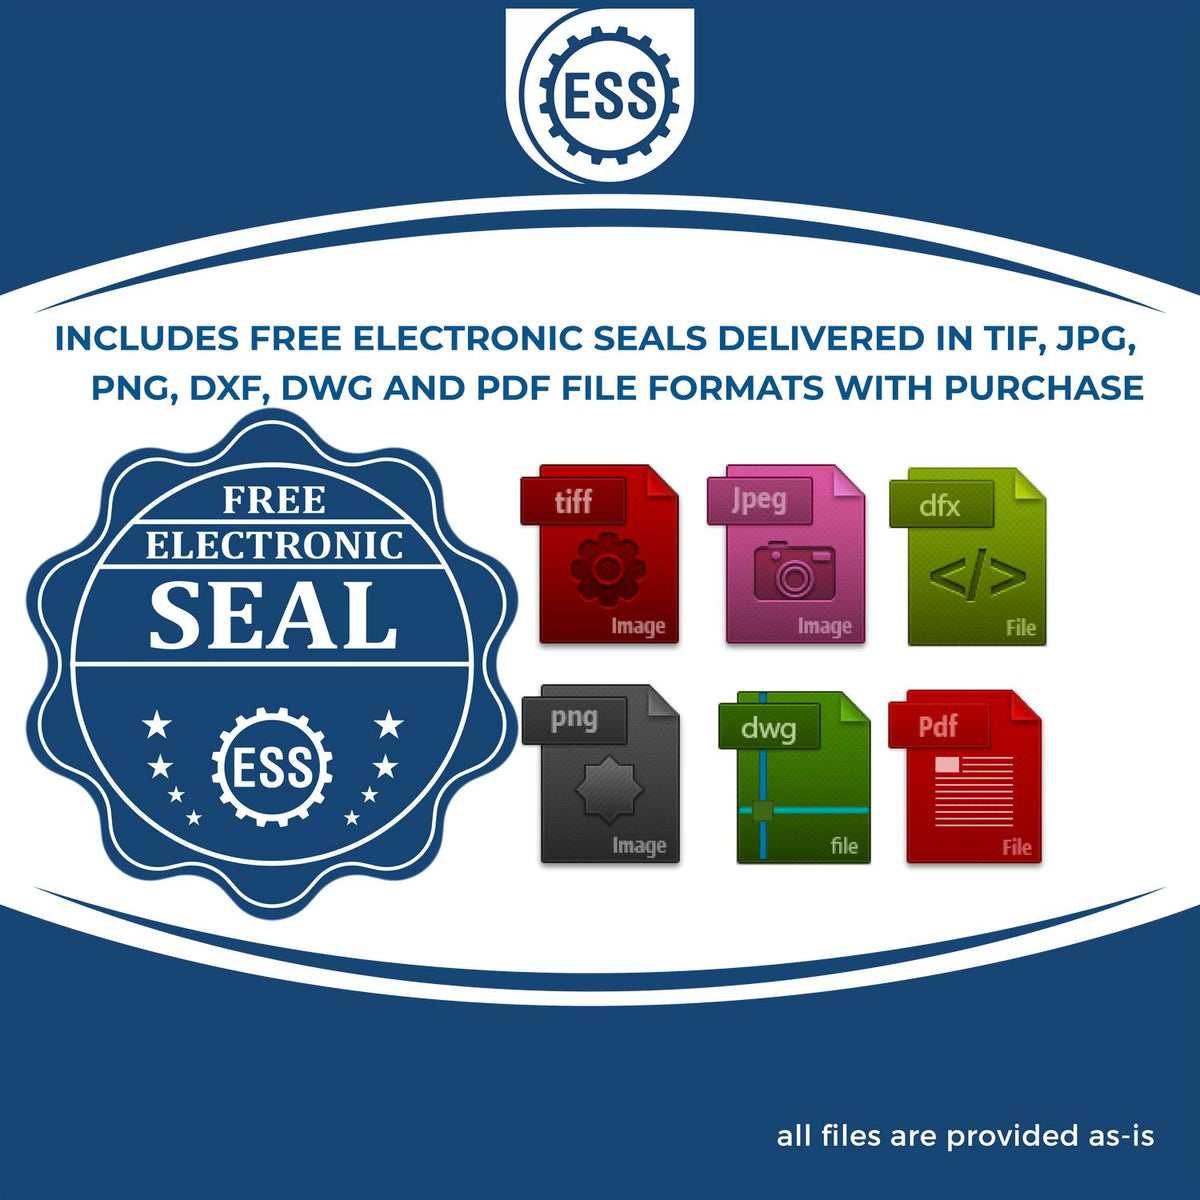 An infographic for the free electronic seal for the PSI Michigan Notary Stamp illustrating the different file type icons such as DXF, DWG, TIF, JPG and PNG.